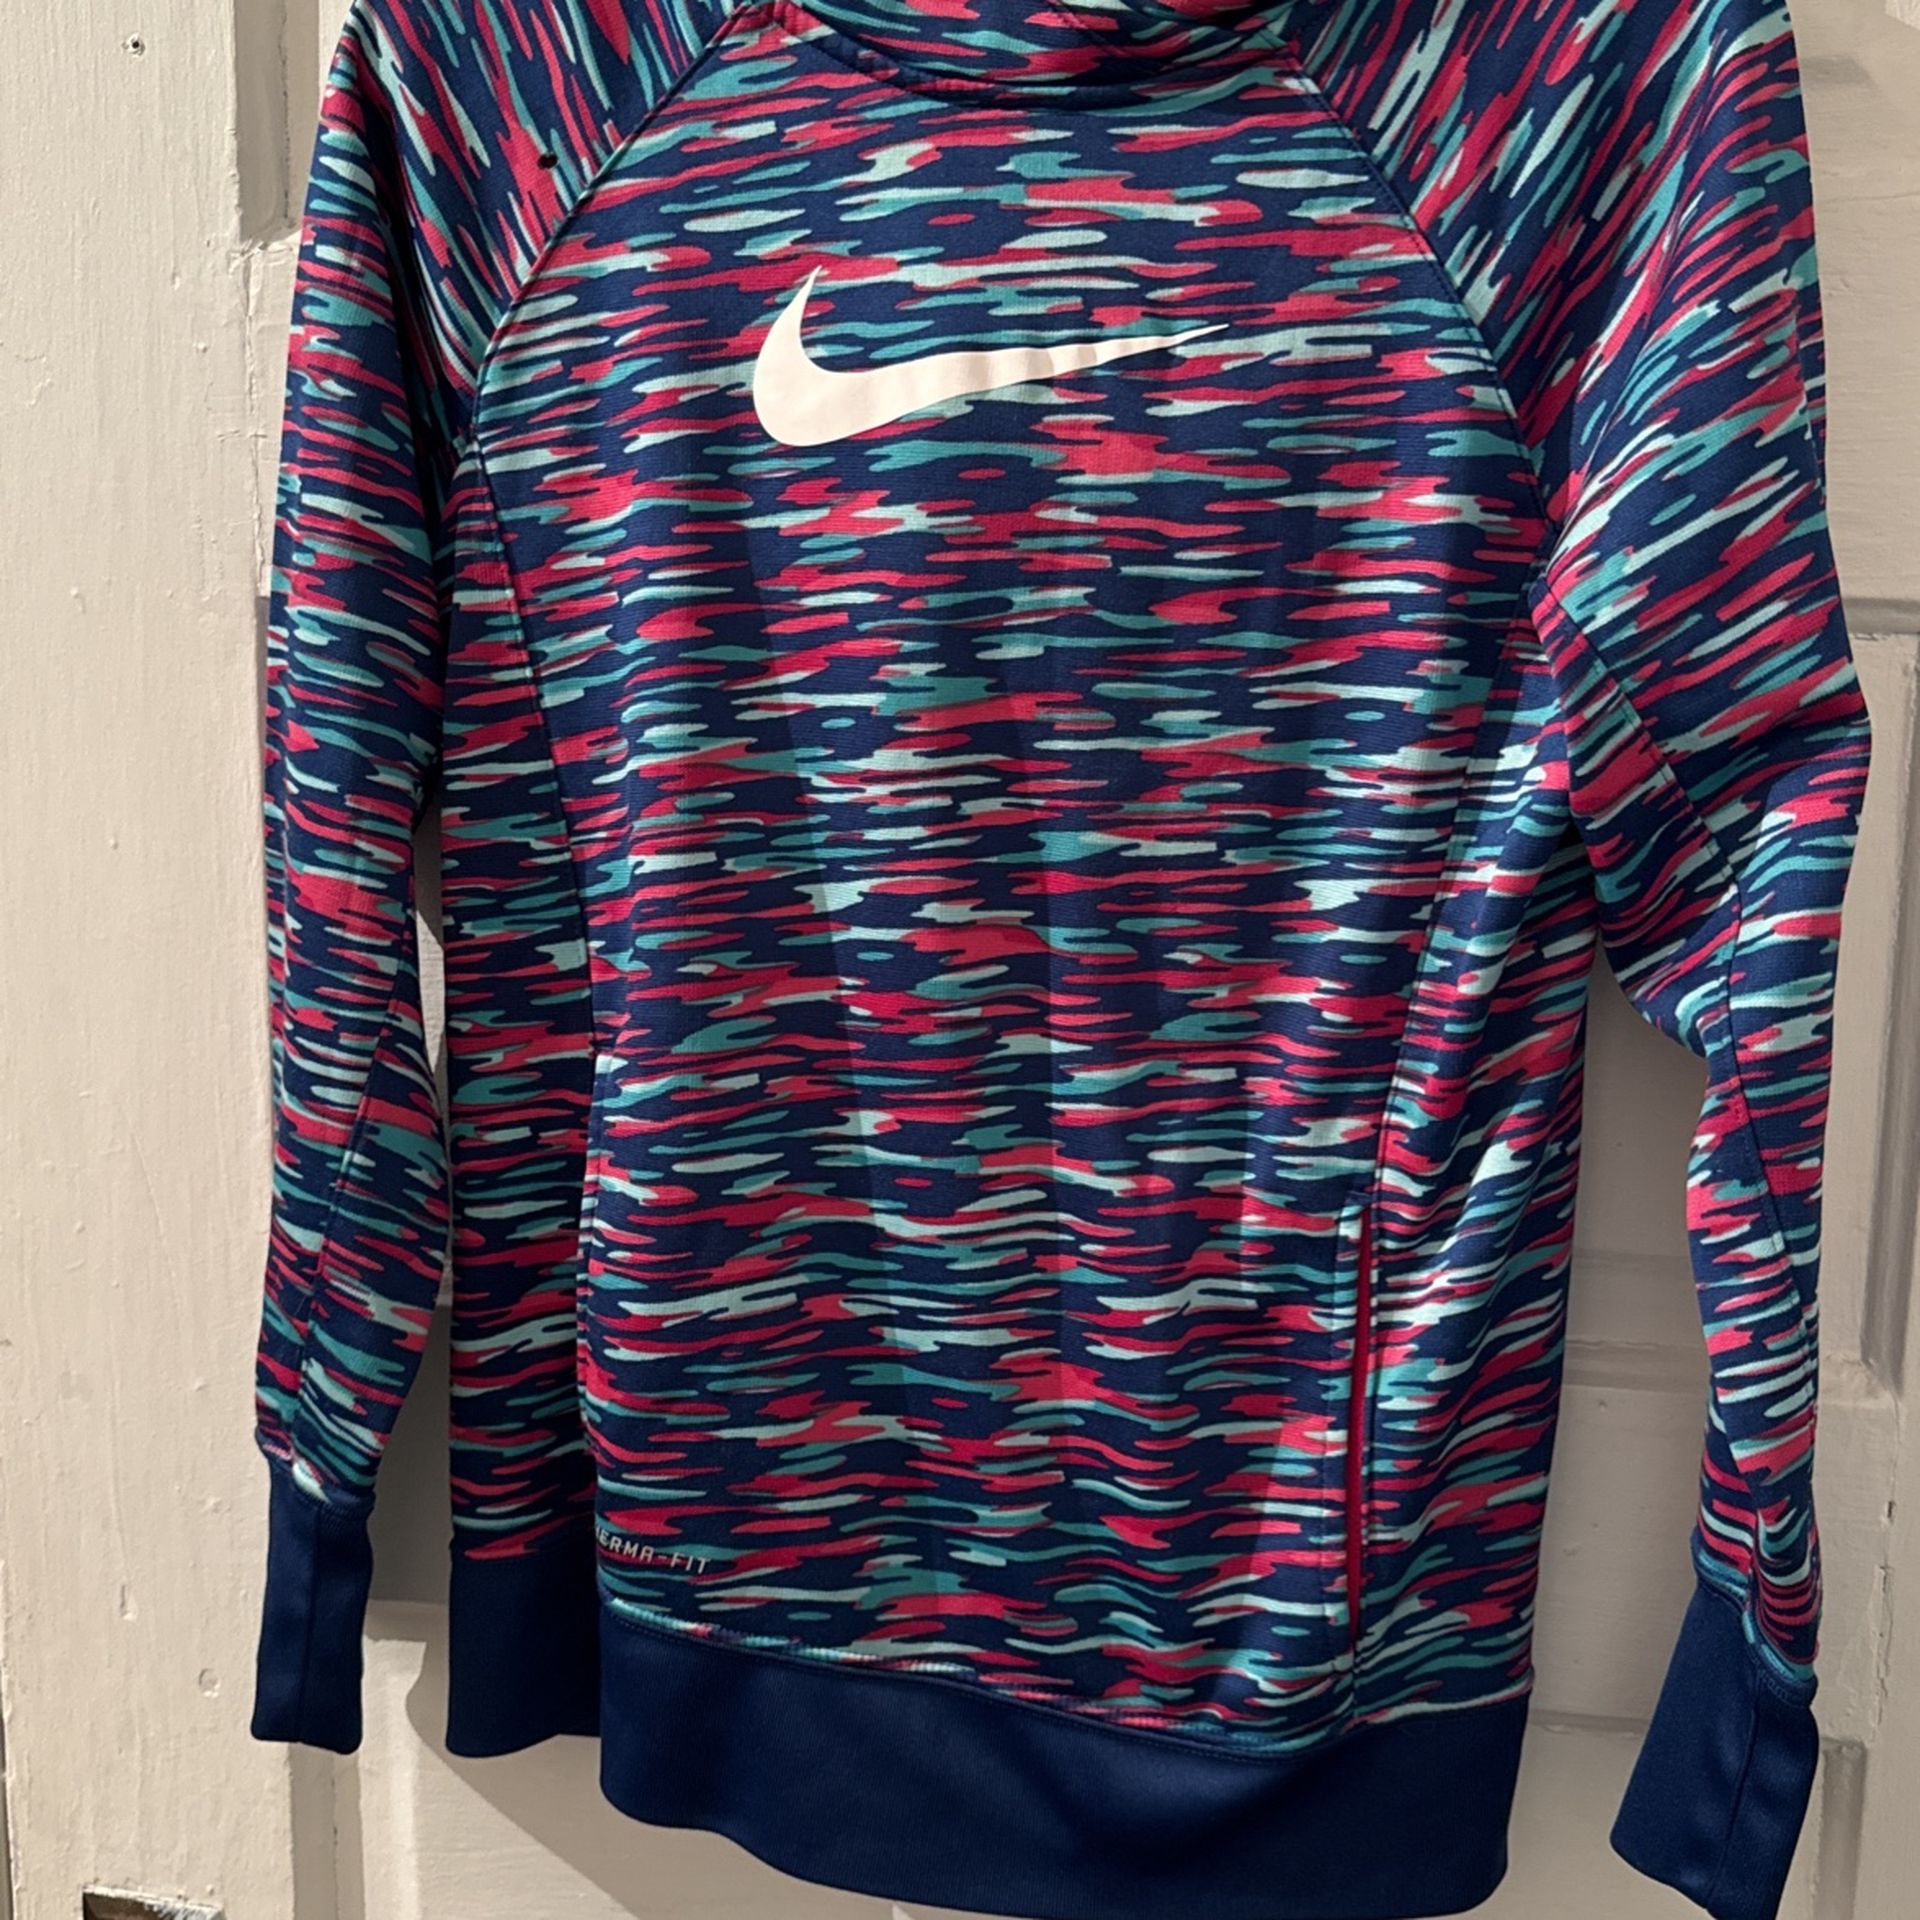 Nike Hoodie XL For small girl youth